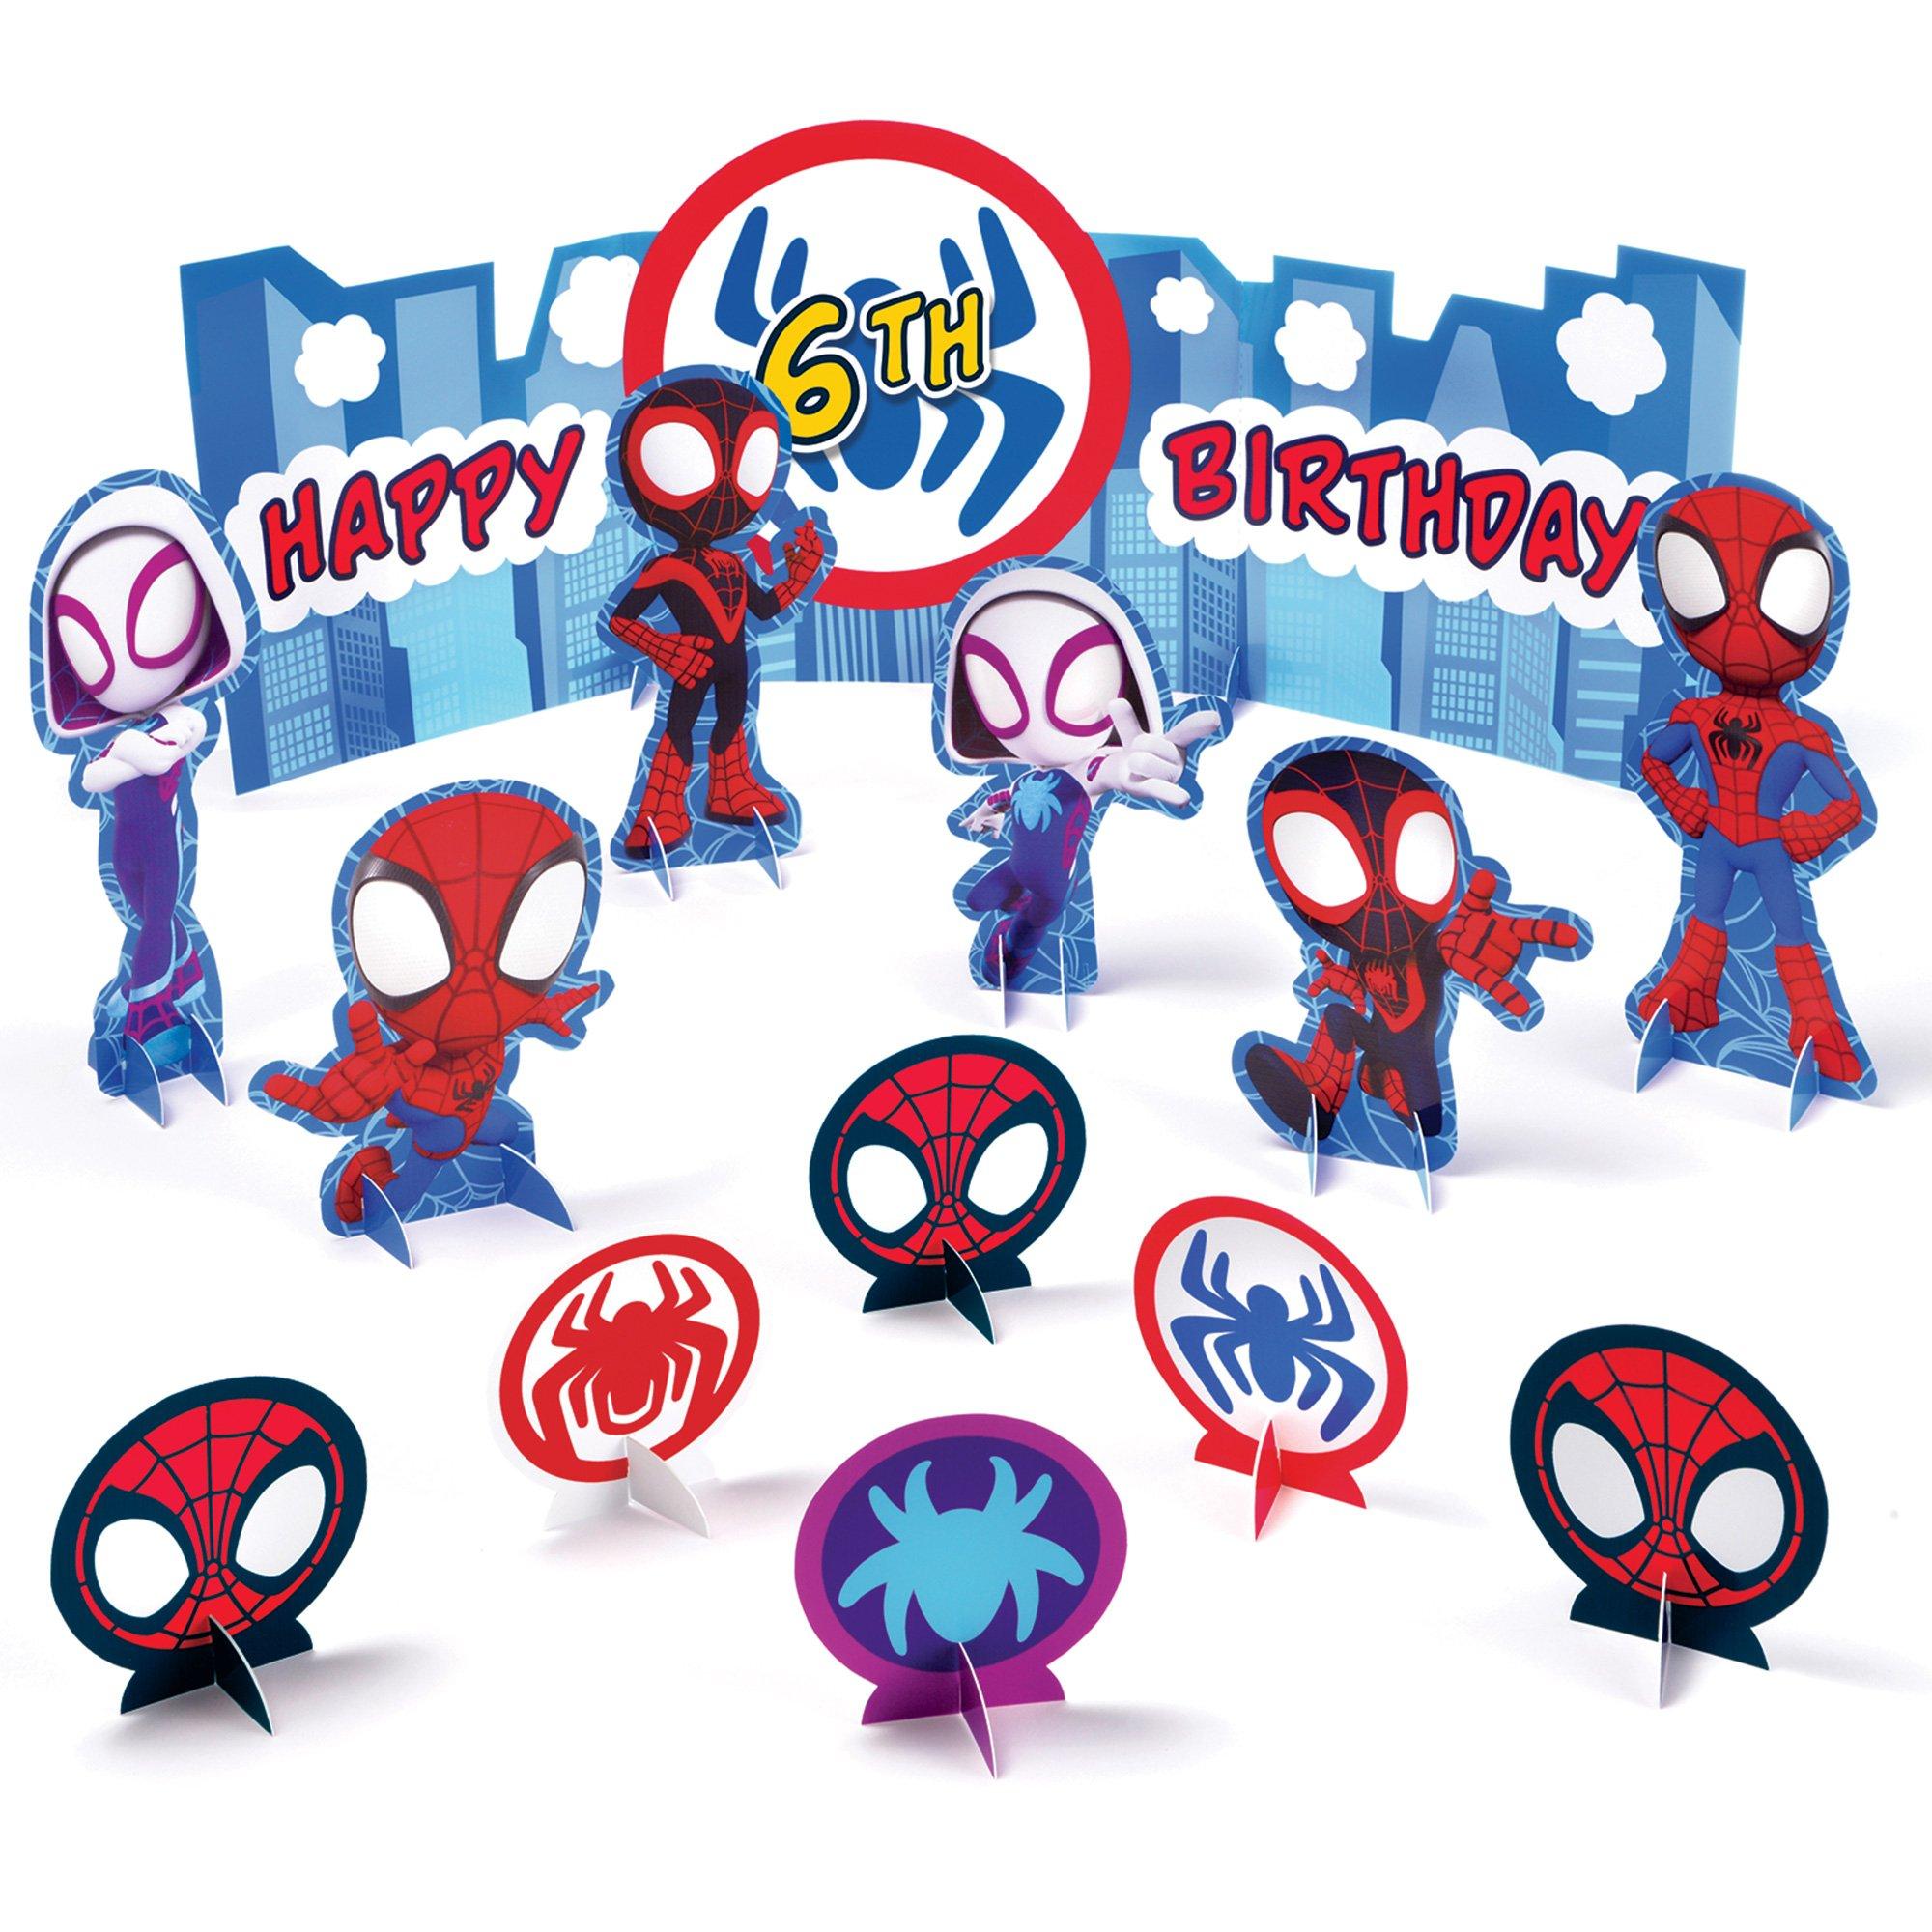 Spidey And His Amazing Friends Cake Topper 